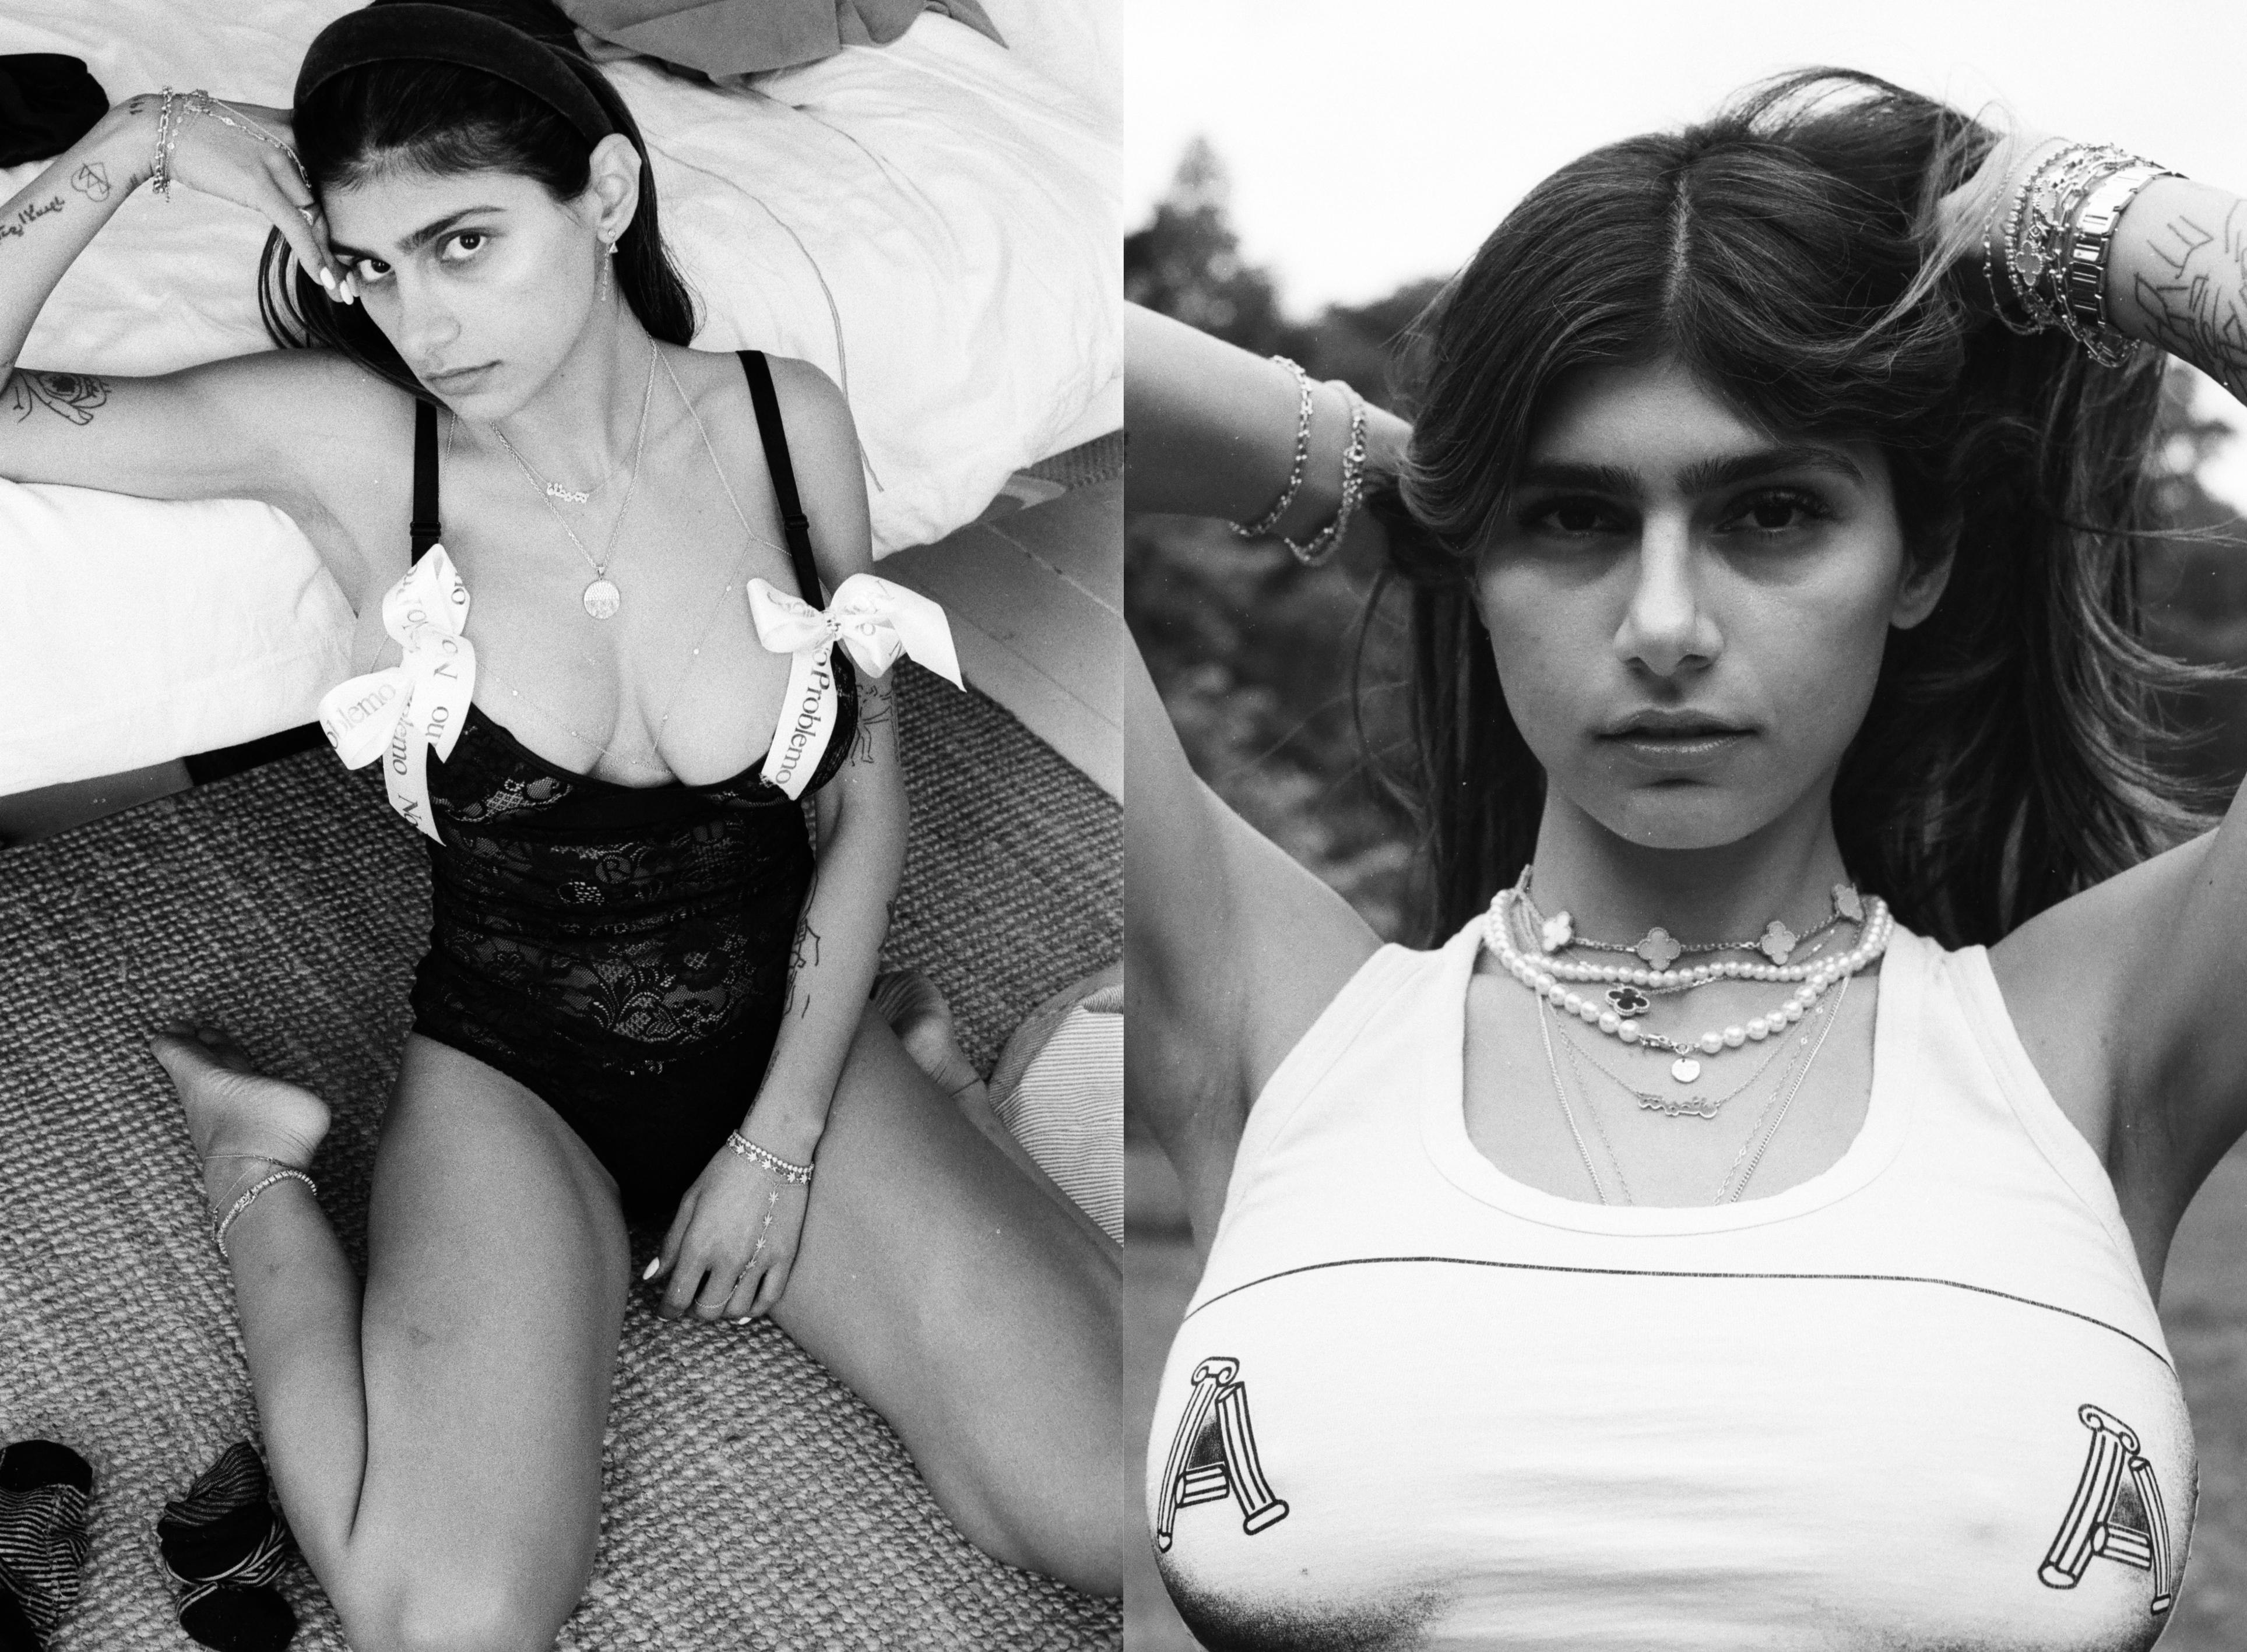 Mia Khalifa's Solo Time is Way Hotter than You Think